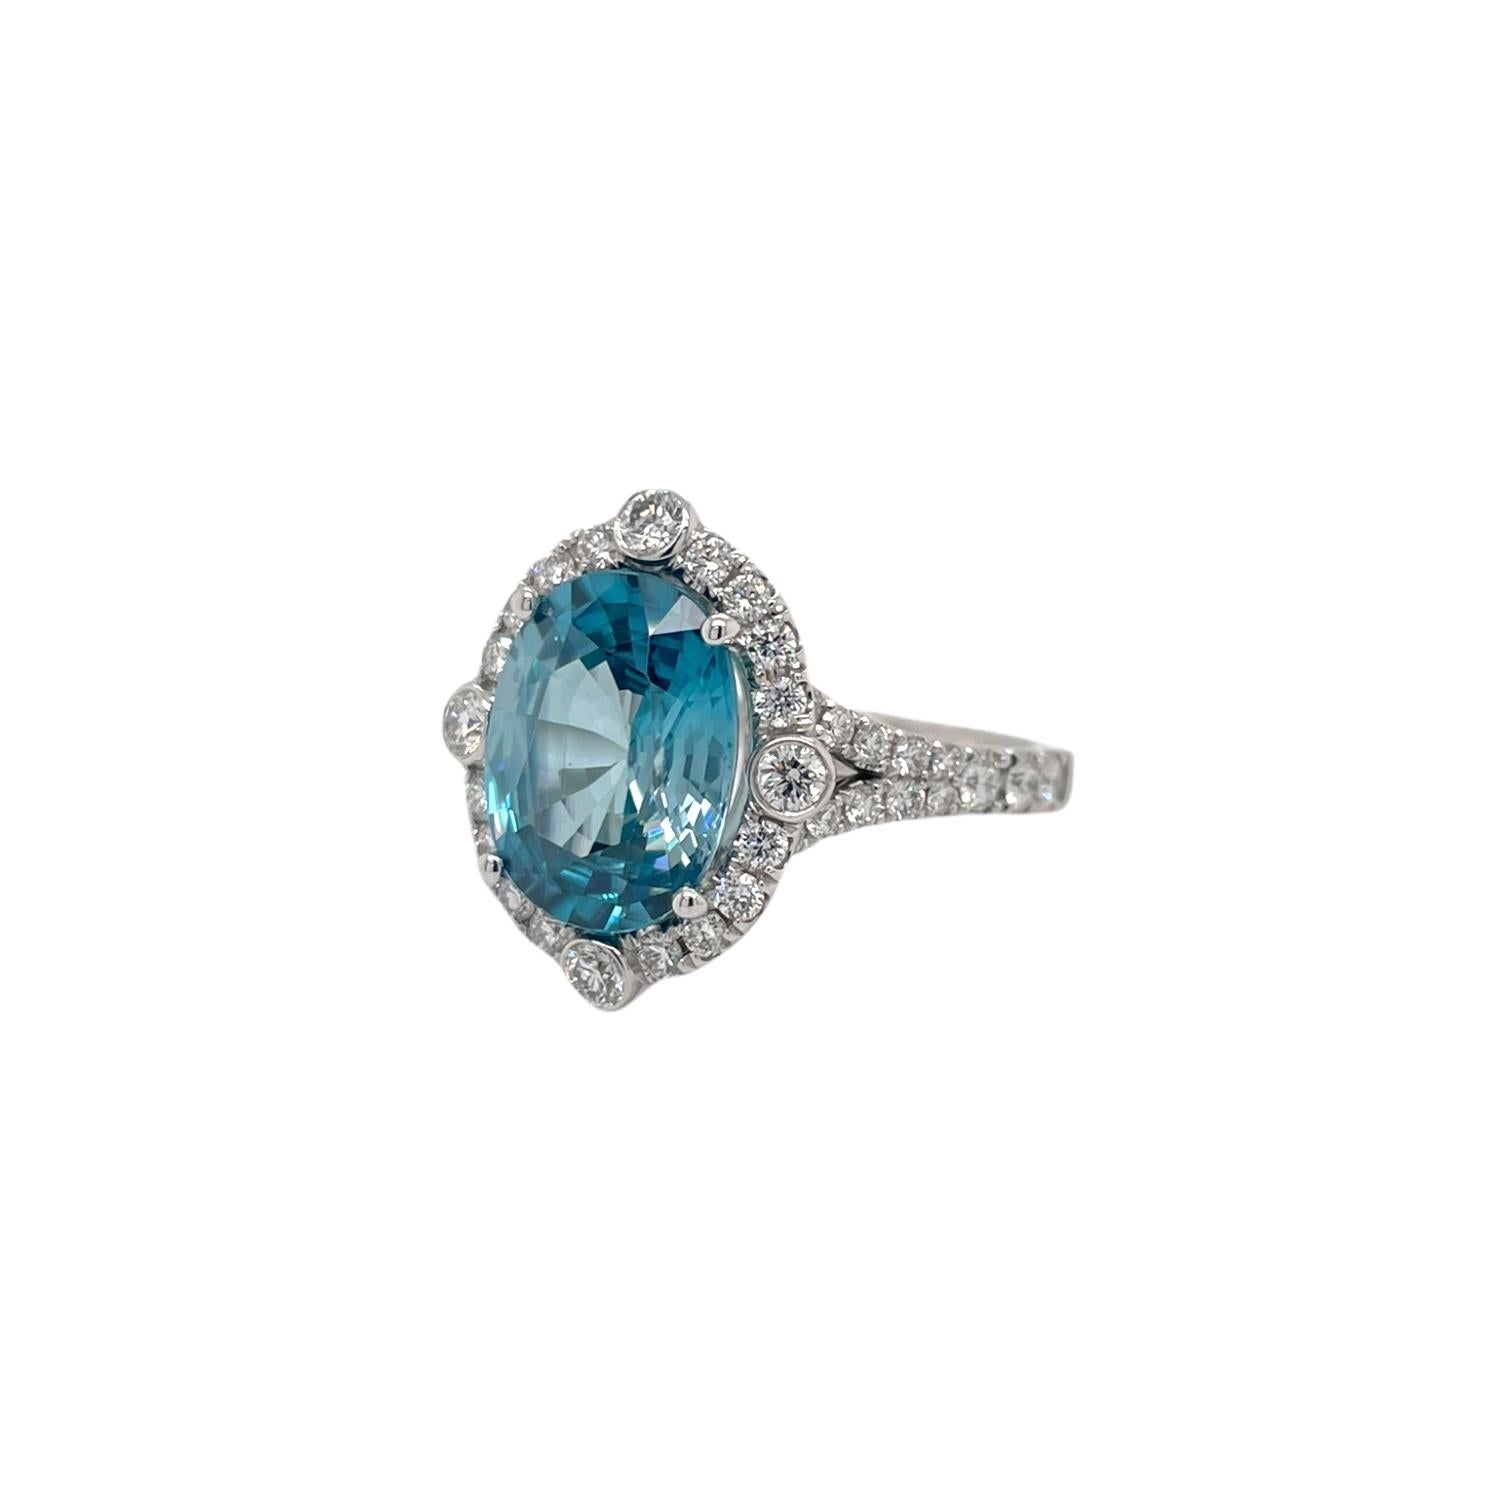 Ring contains 1 oval blue zircon weighing 5.78ct. Center stone is surrounded by a halo of round brilliant diamonds and diamonds going down the band, 0.90tcw. Diamonds are near colorless and SI1 in clarity, excellent cut. All stones are mounted in a